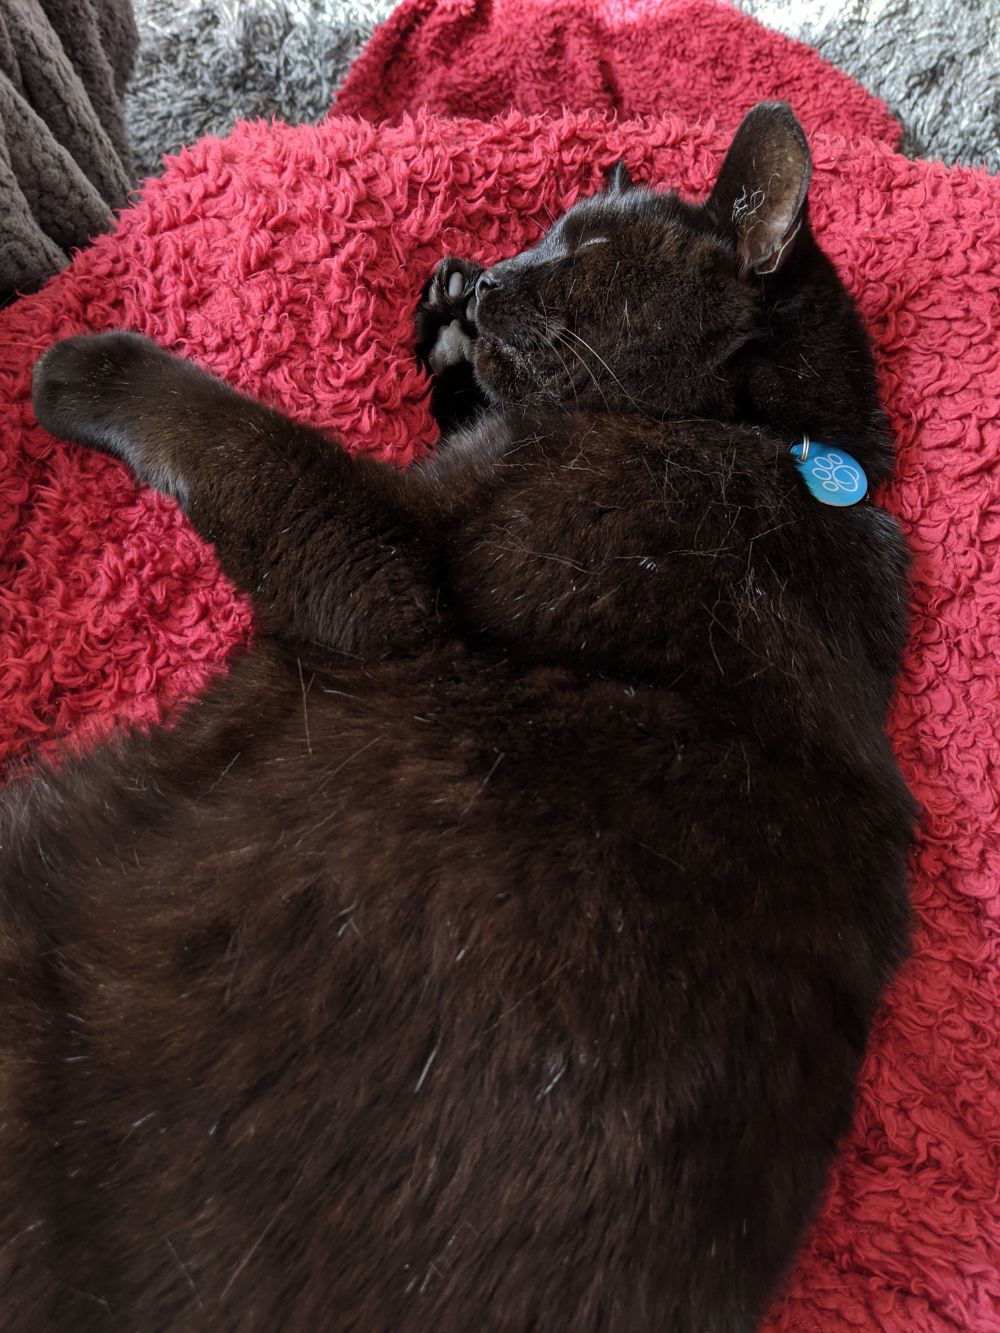 Black cat lying on a red blanket over Jamie's legs, resting on one of his paws